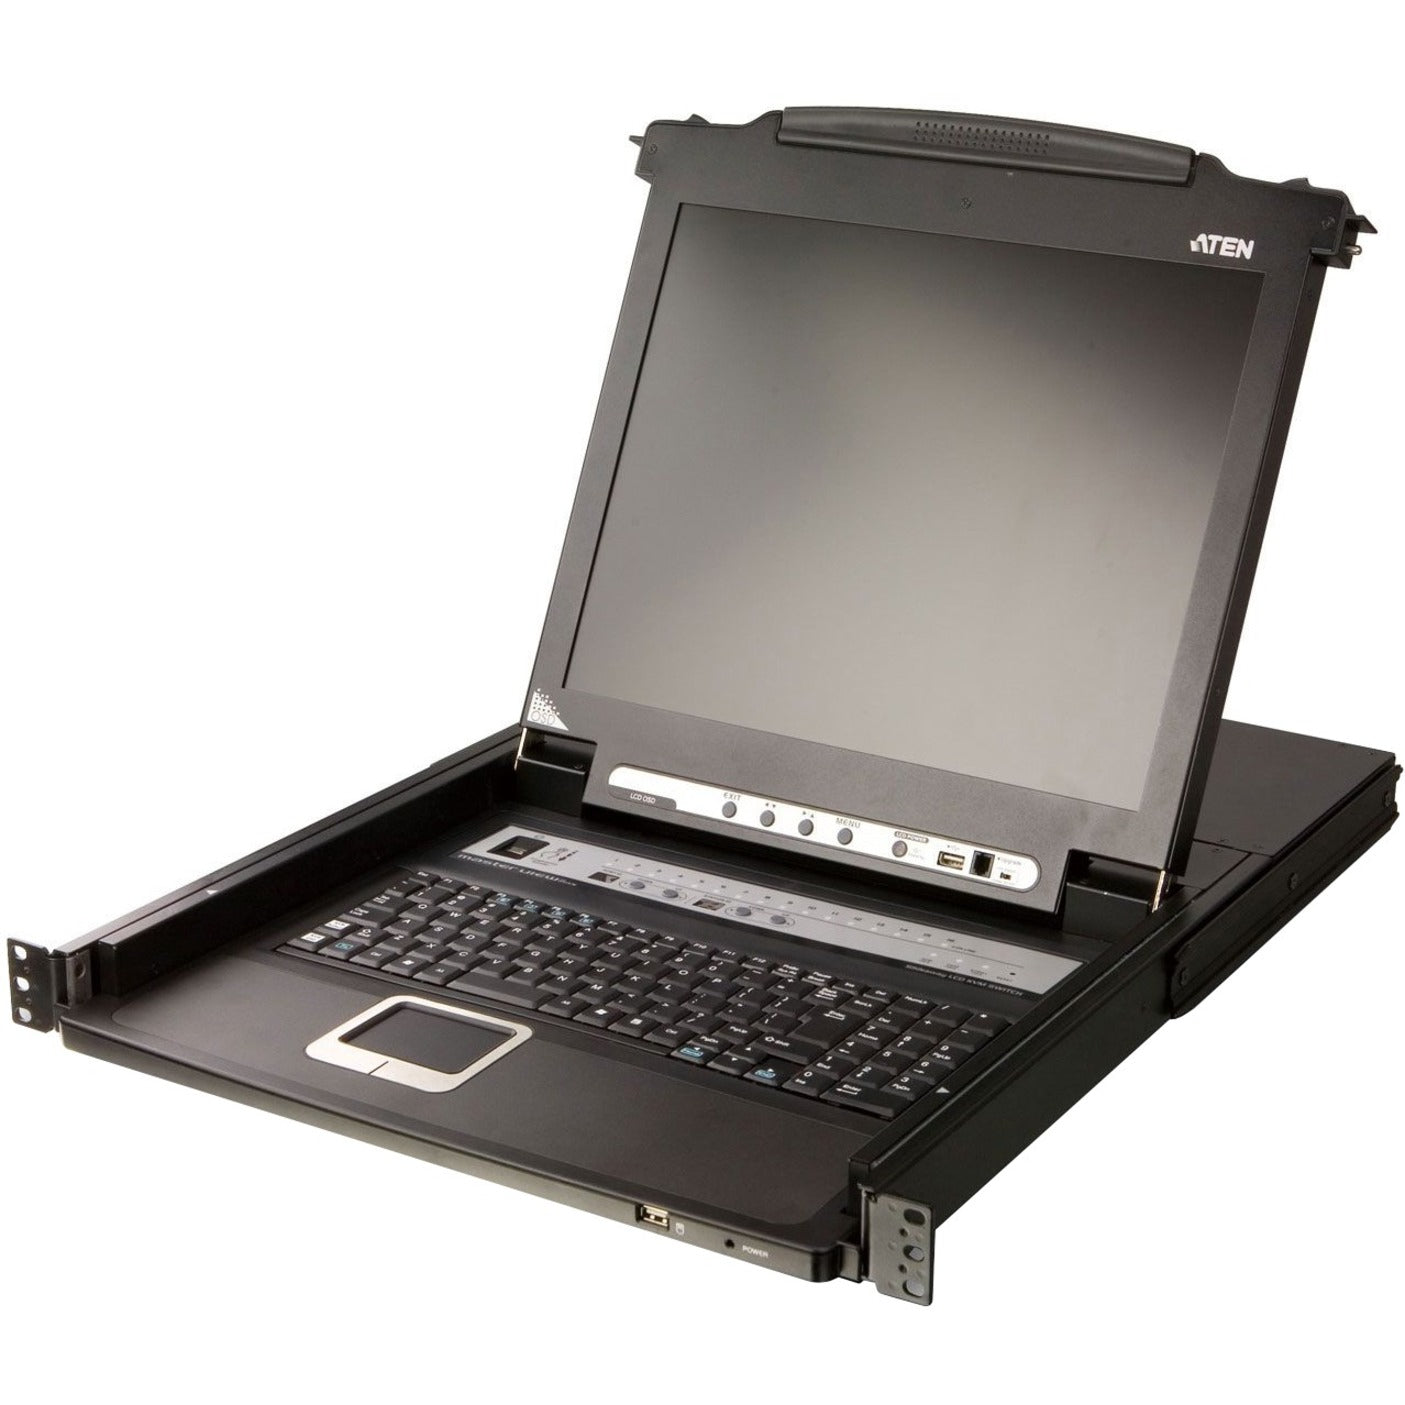 ATEN CL5708M 8-Port 17in. Slideaway LCD KVM Switch, Rackmount Console with Keyboard and TouchPad